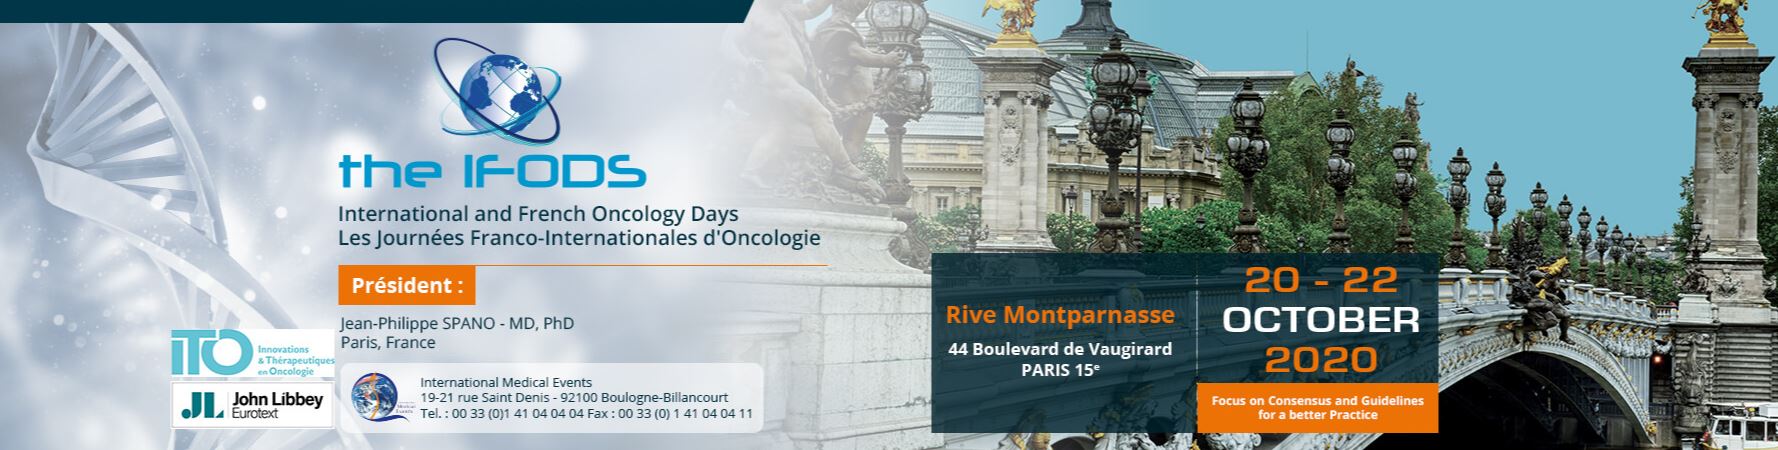 3rd International and French Oncology Days - IFODS 2020